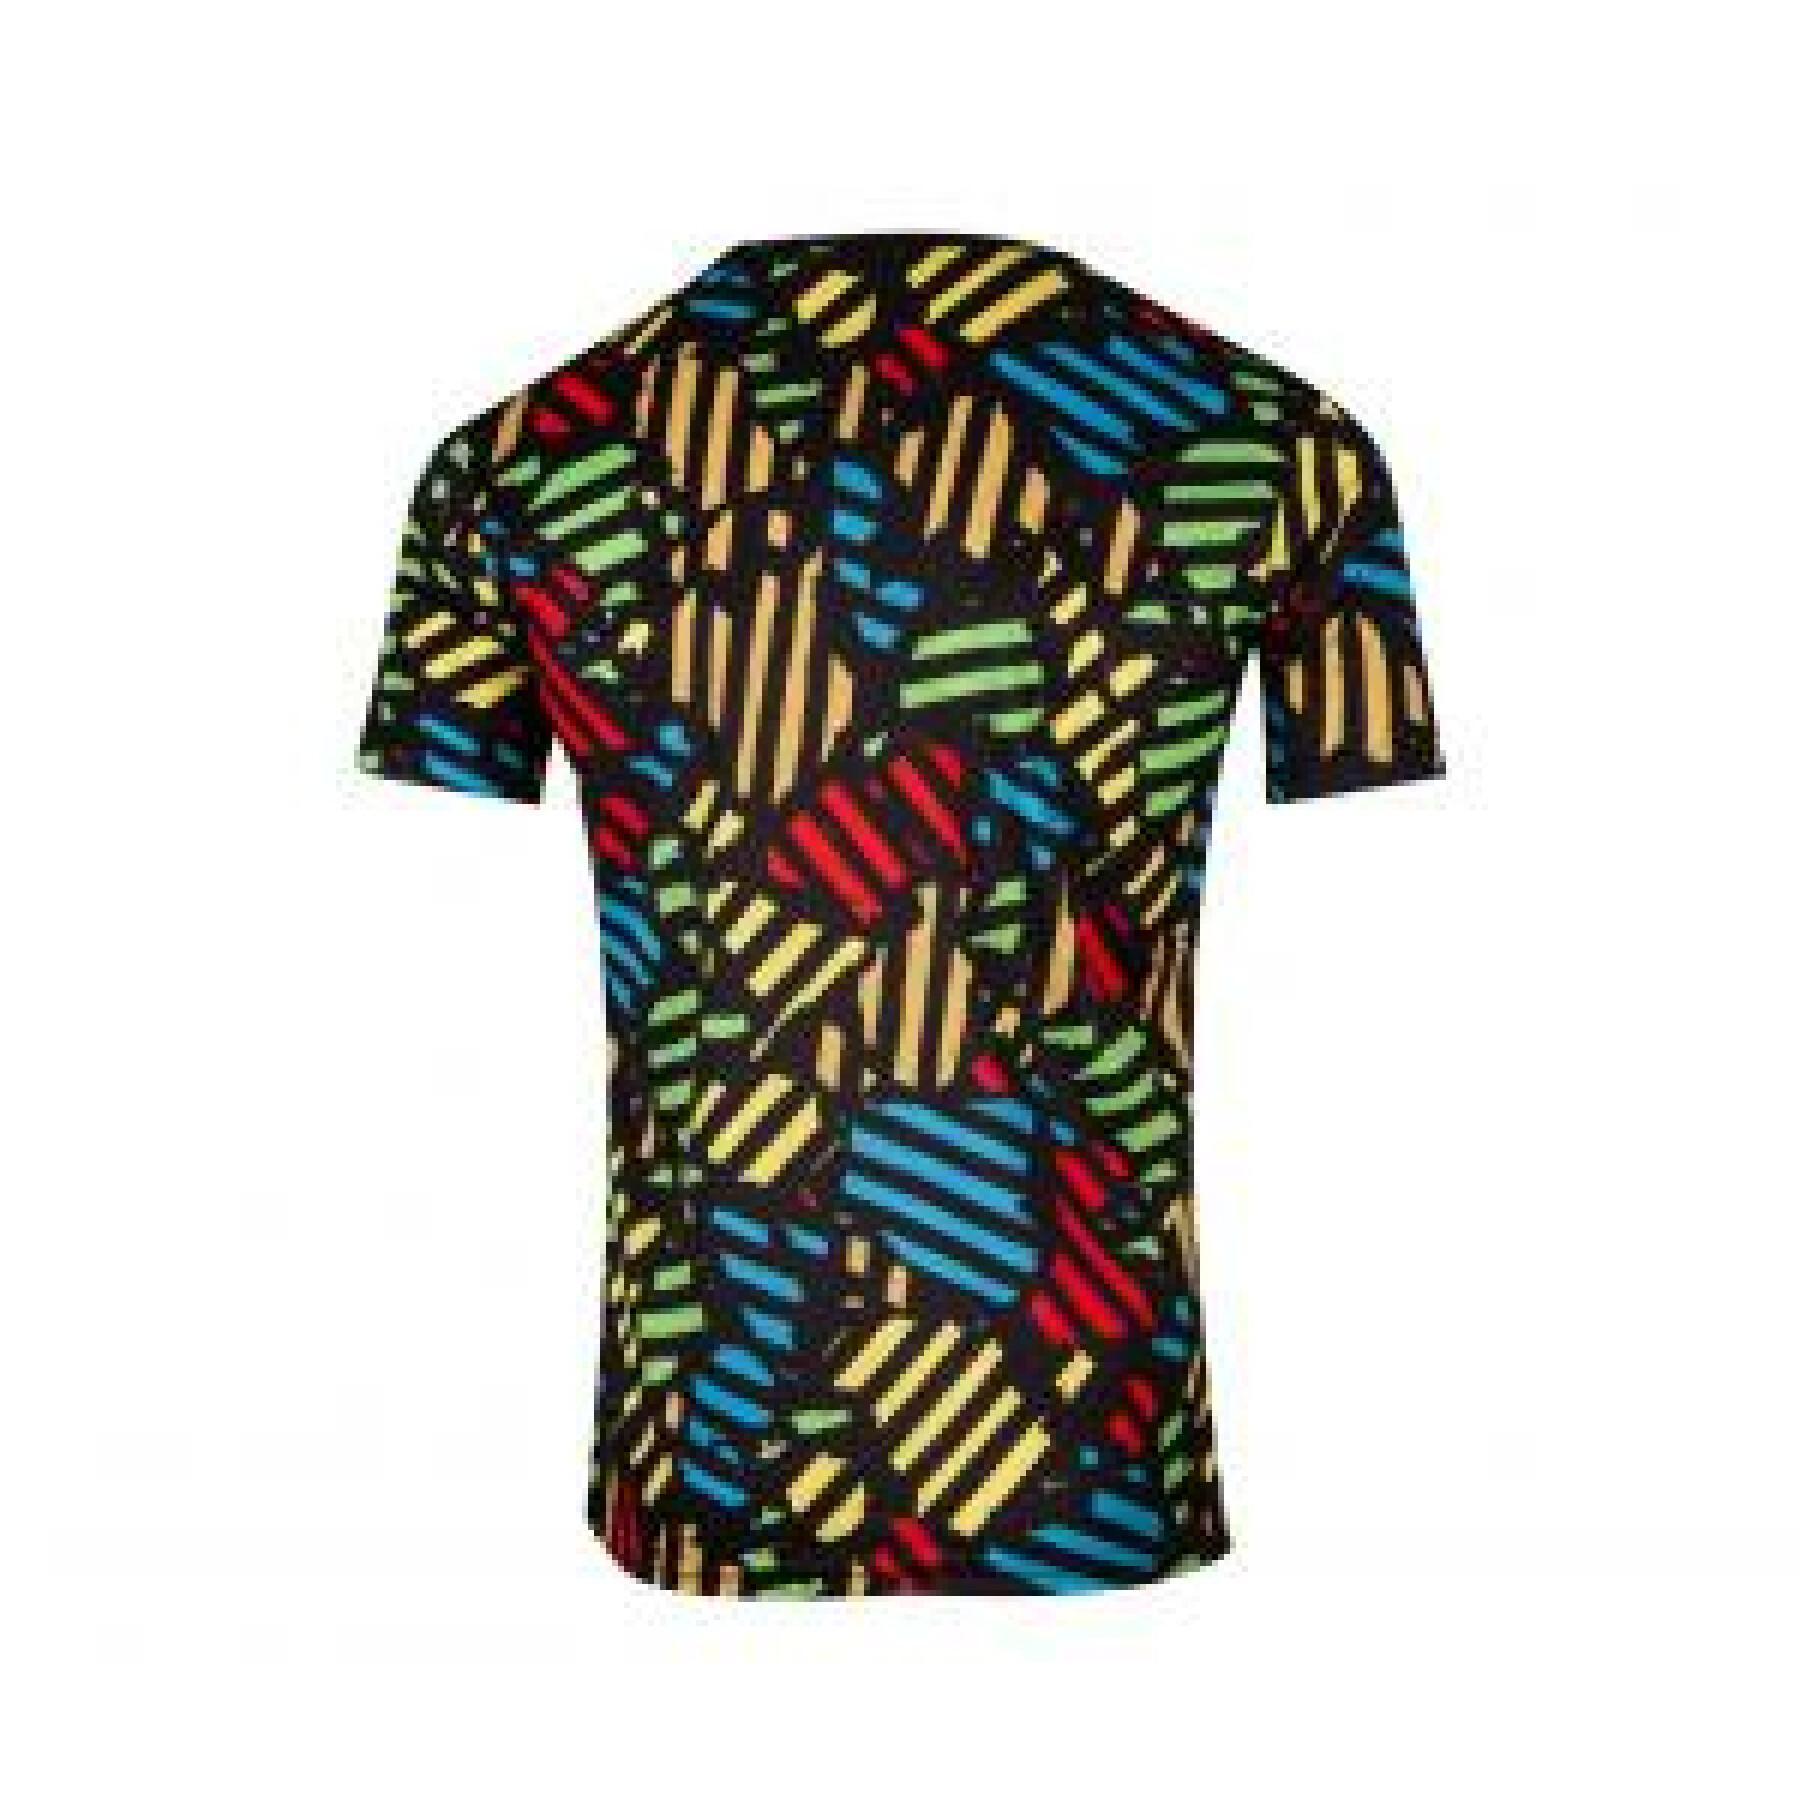 Maillot OM x Africa 2022/23